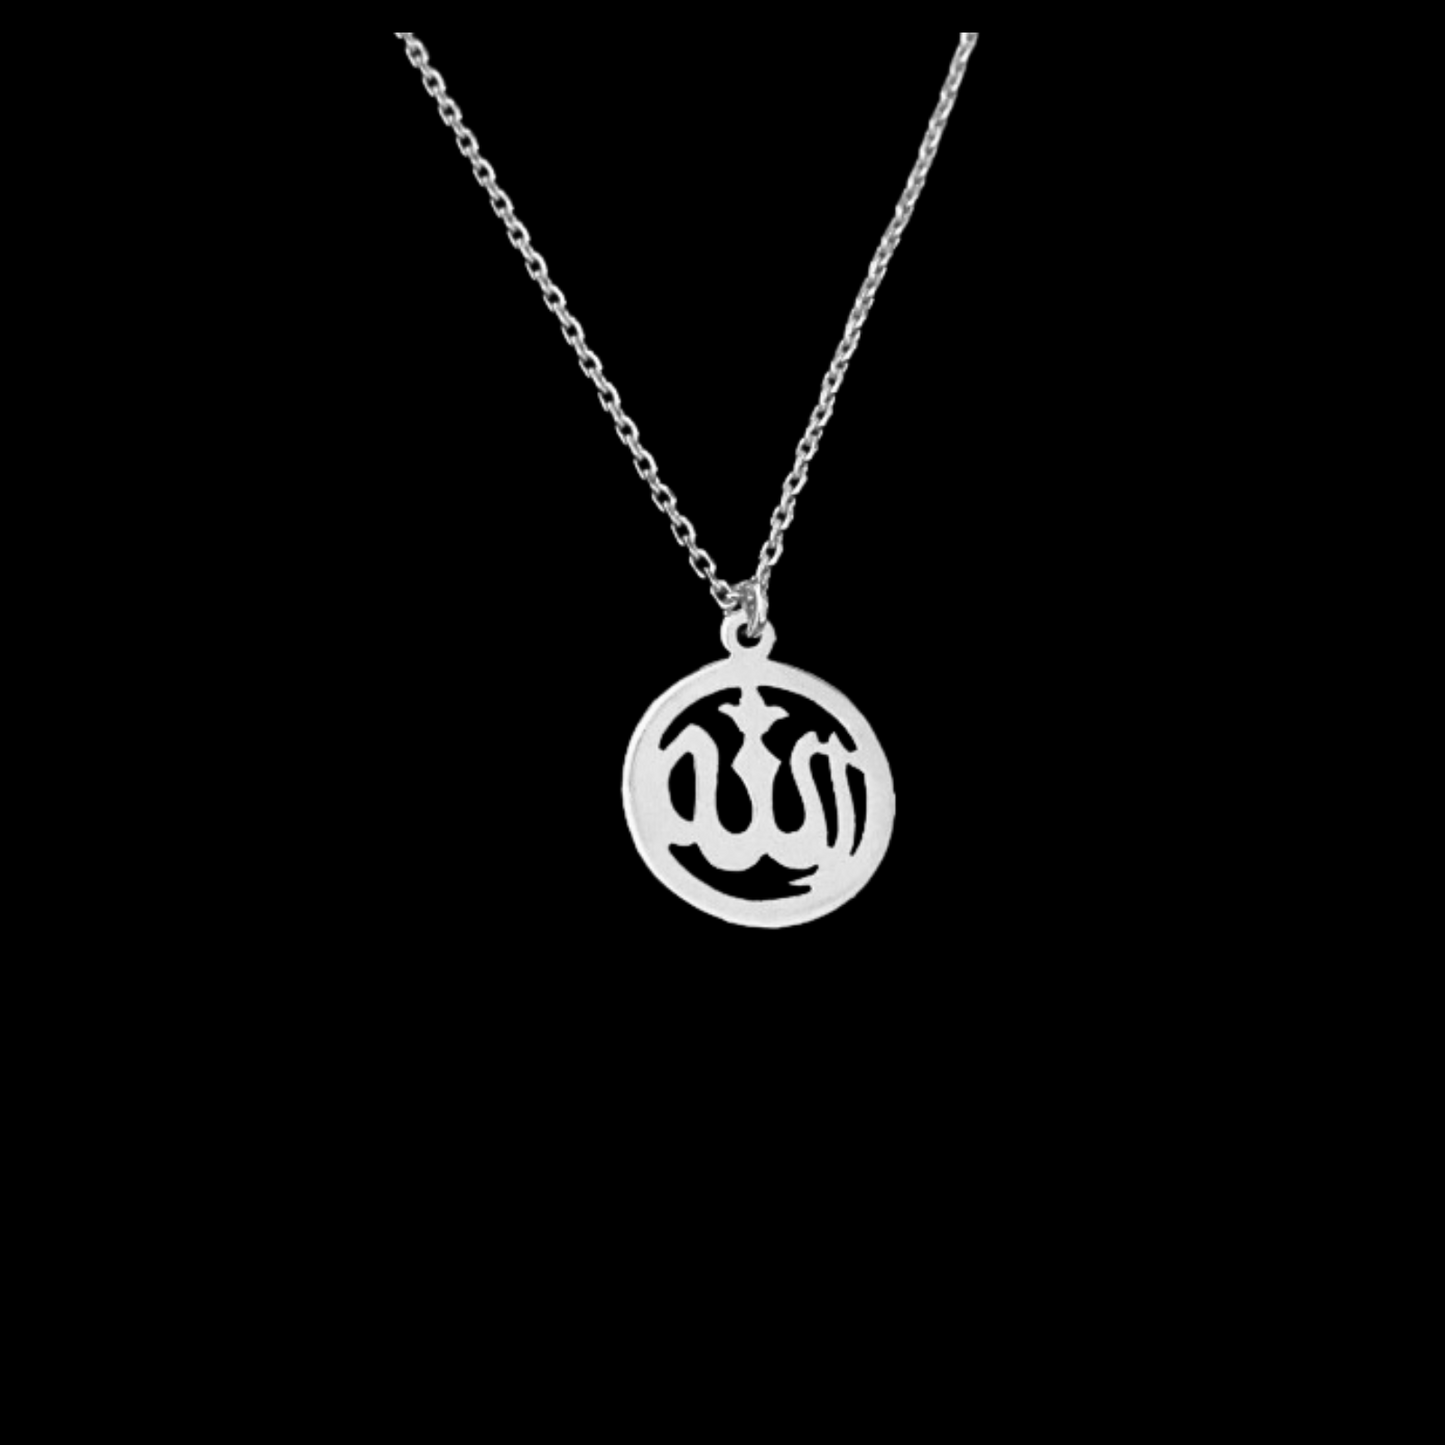 Allah Necklace in 92.5 sterling silver